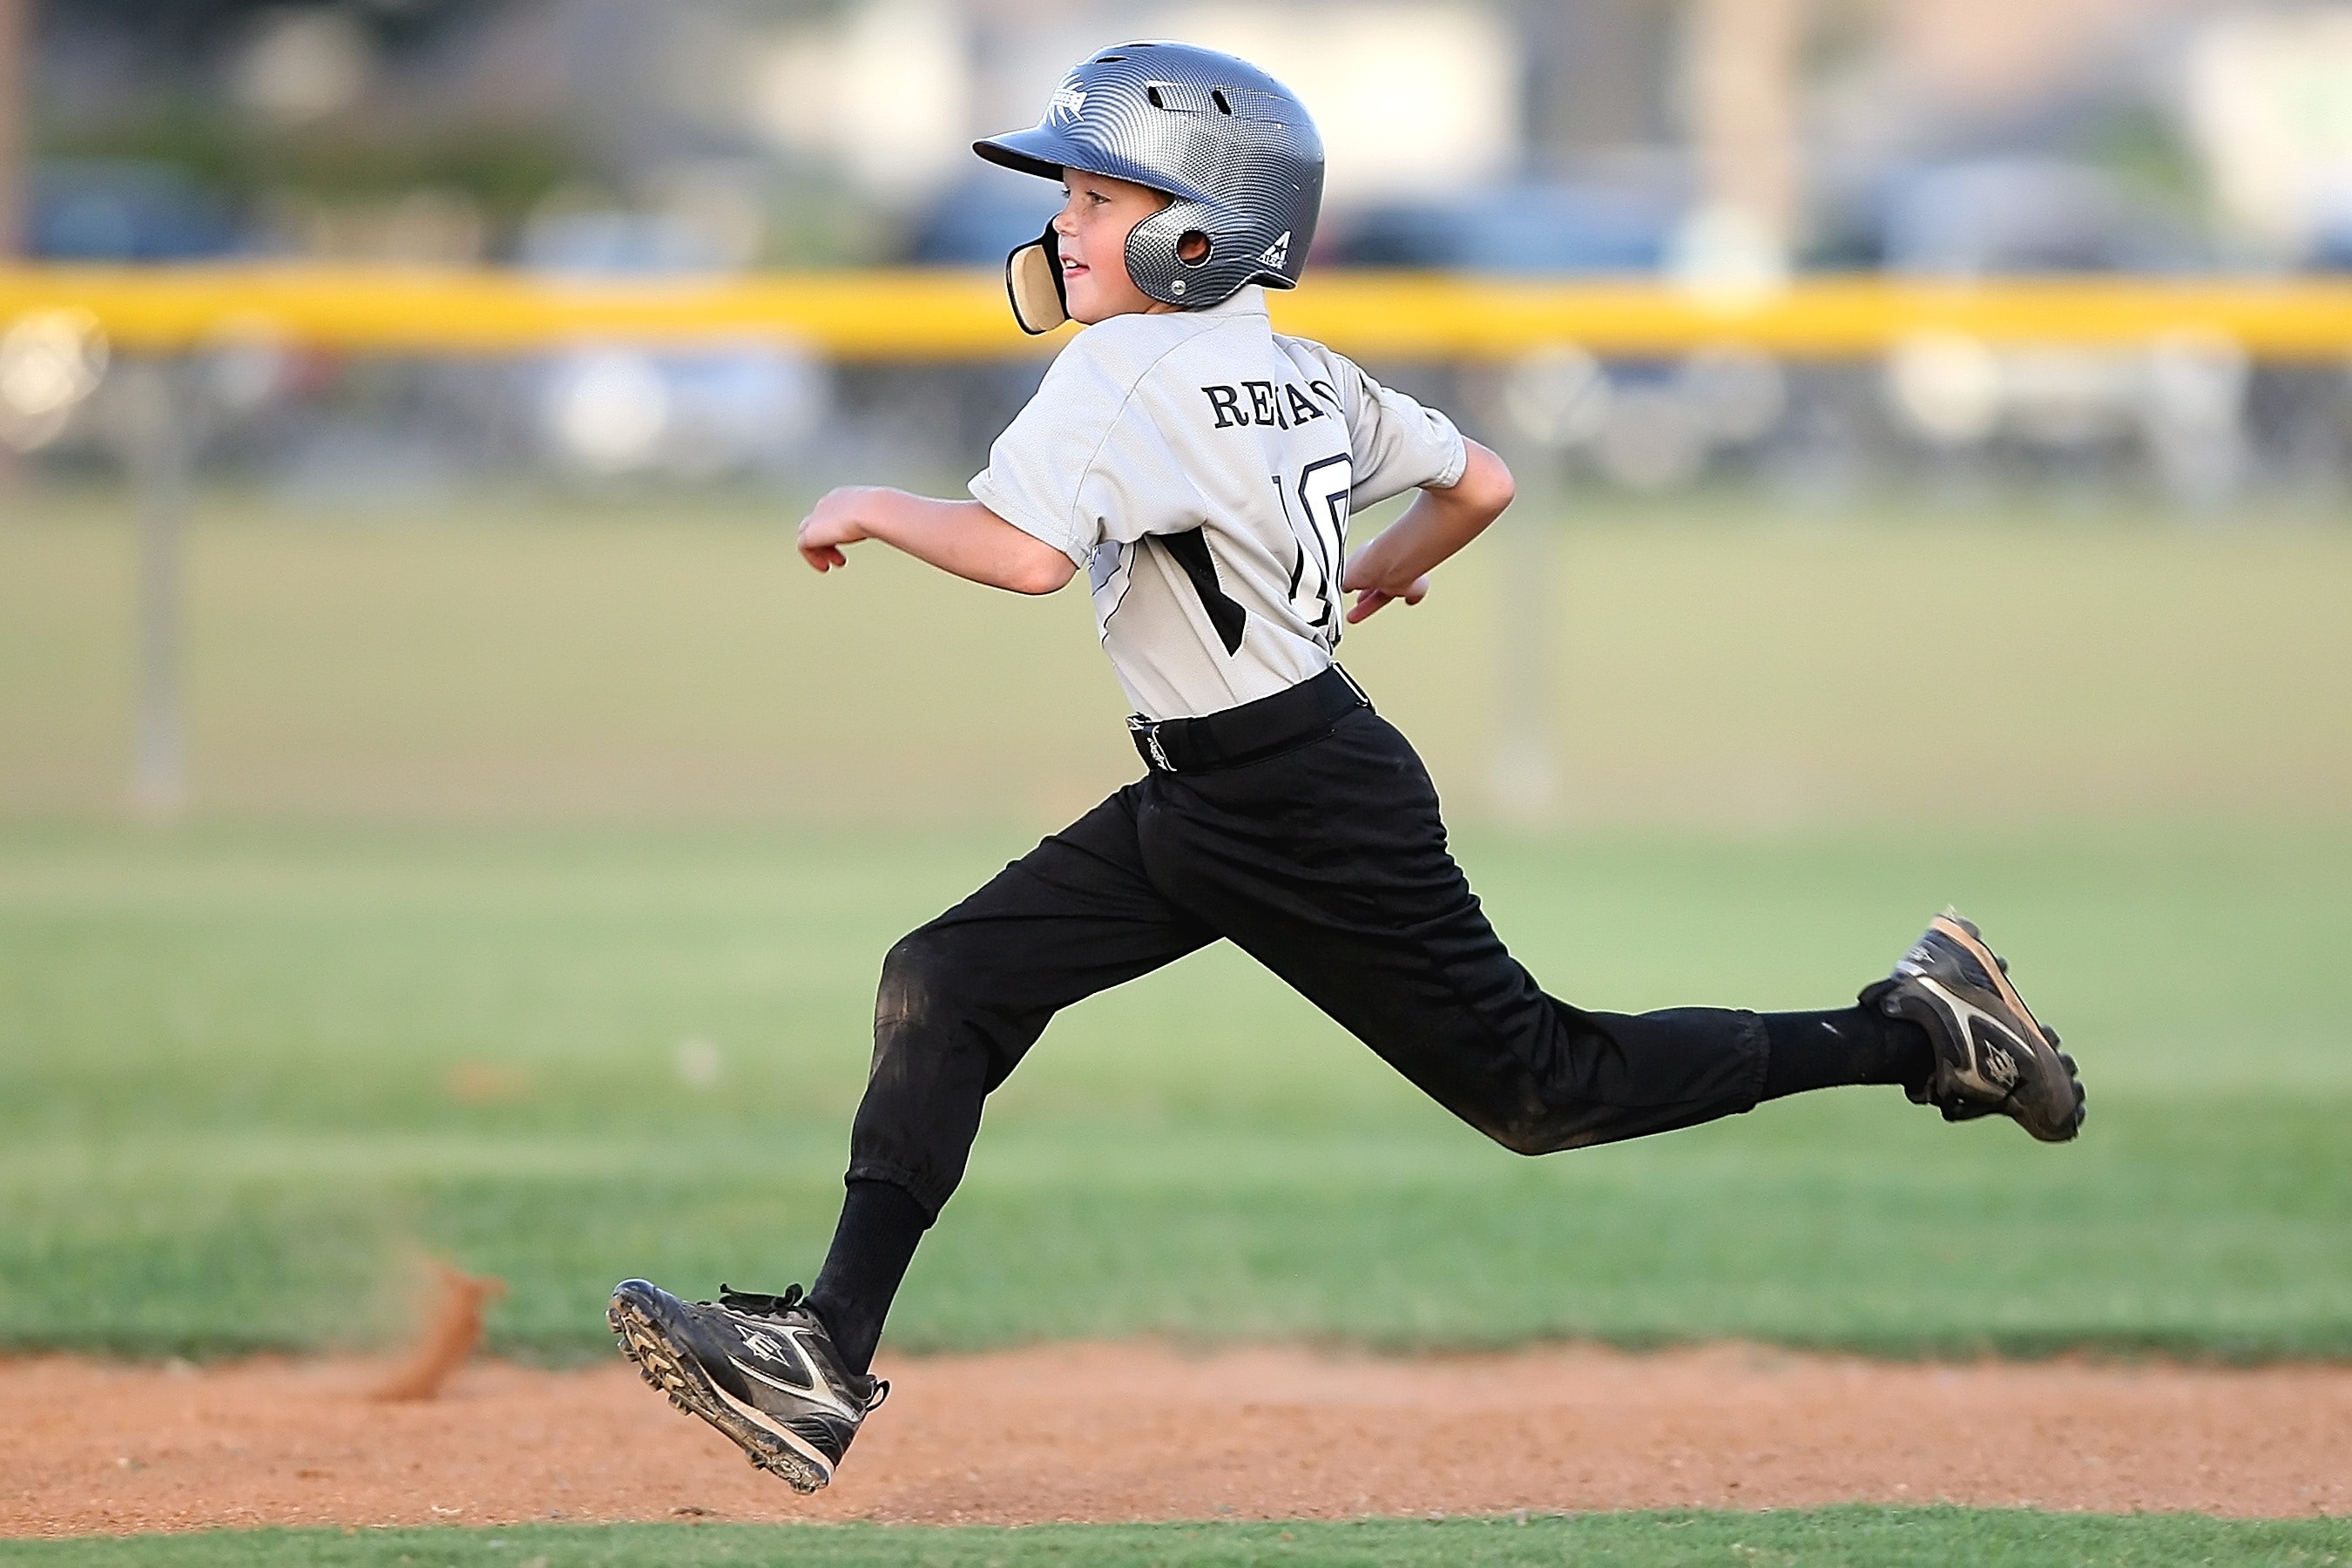 Young baseball player running to the next base